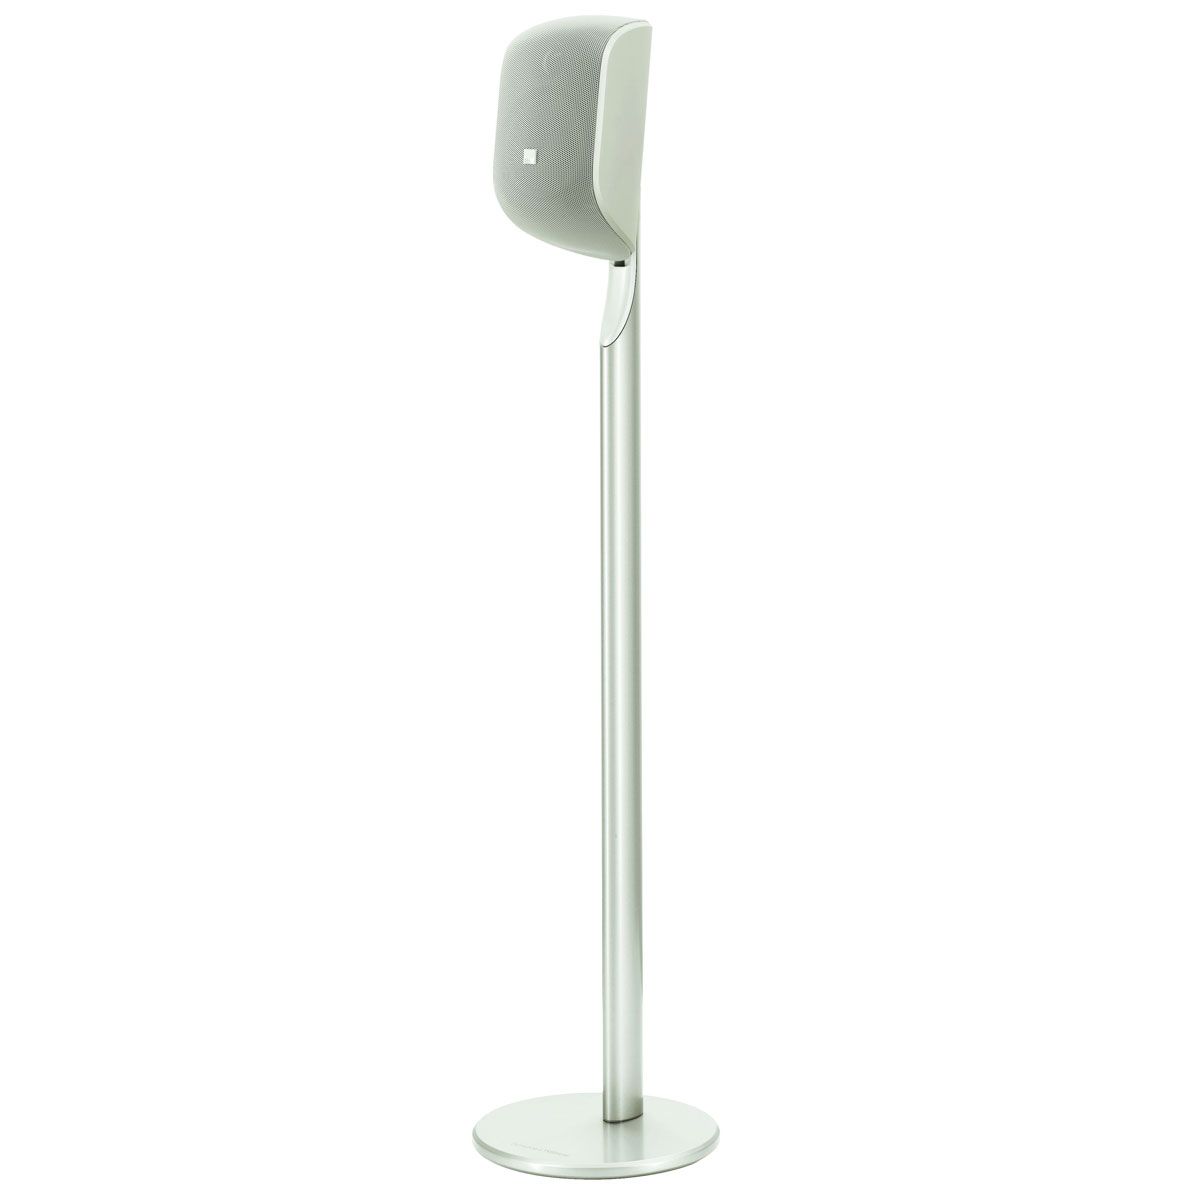 Bower and Wilkins M-1 Speaker Stands - Pair-white